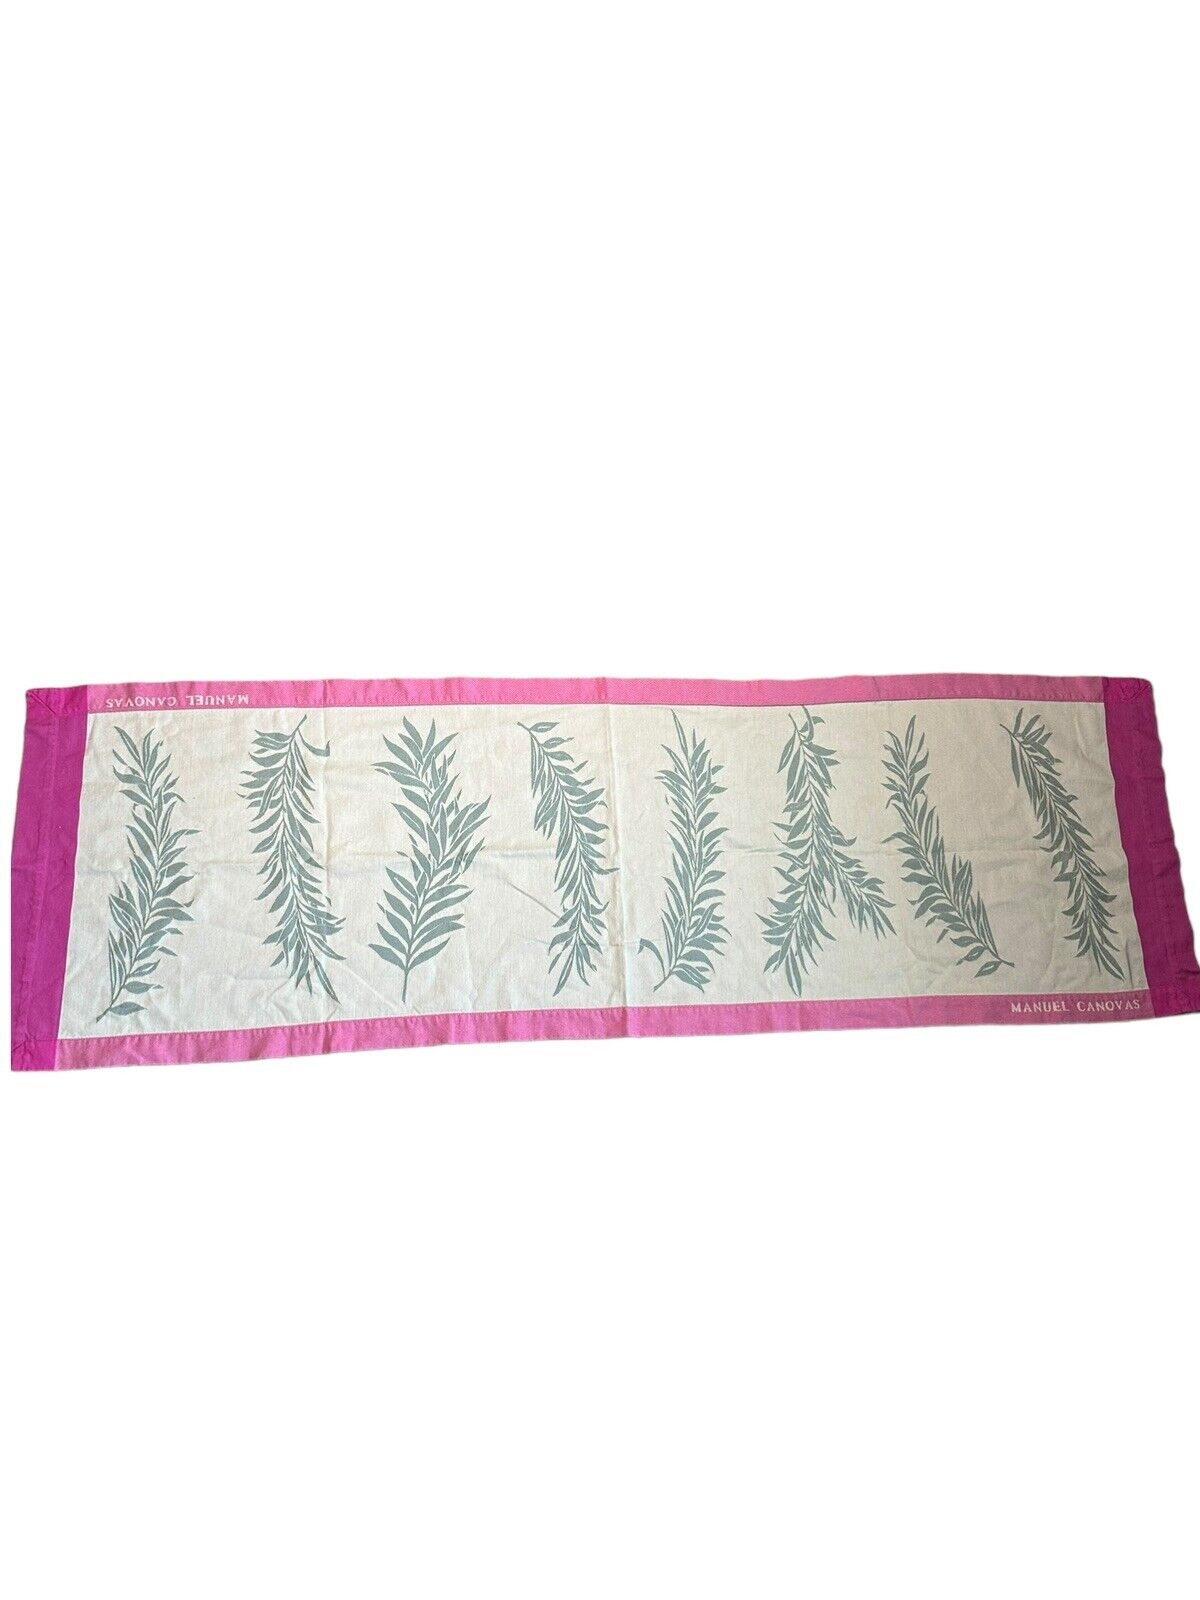 Manuel Canovas Pink and Beige French Linen, Wall Hanging, Wheat Stalks, 62X20